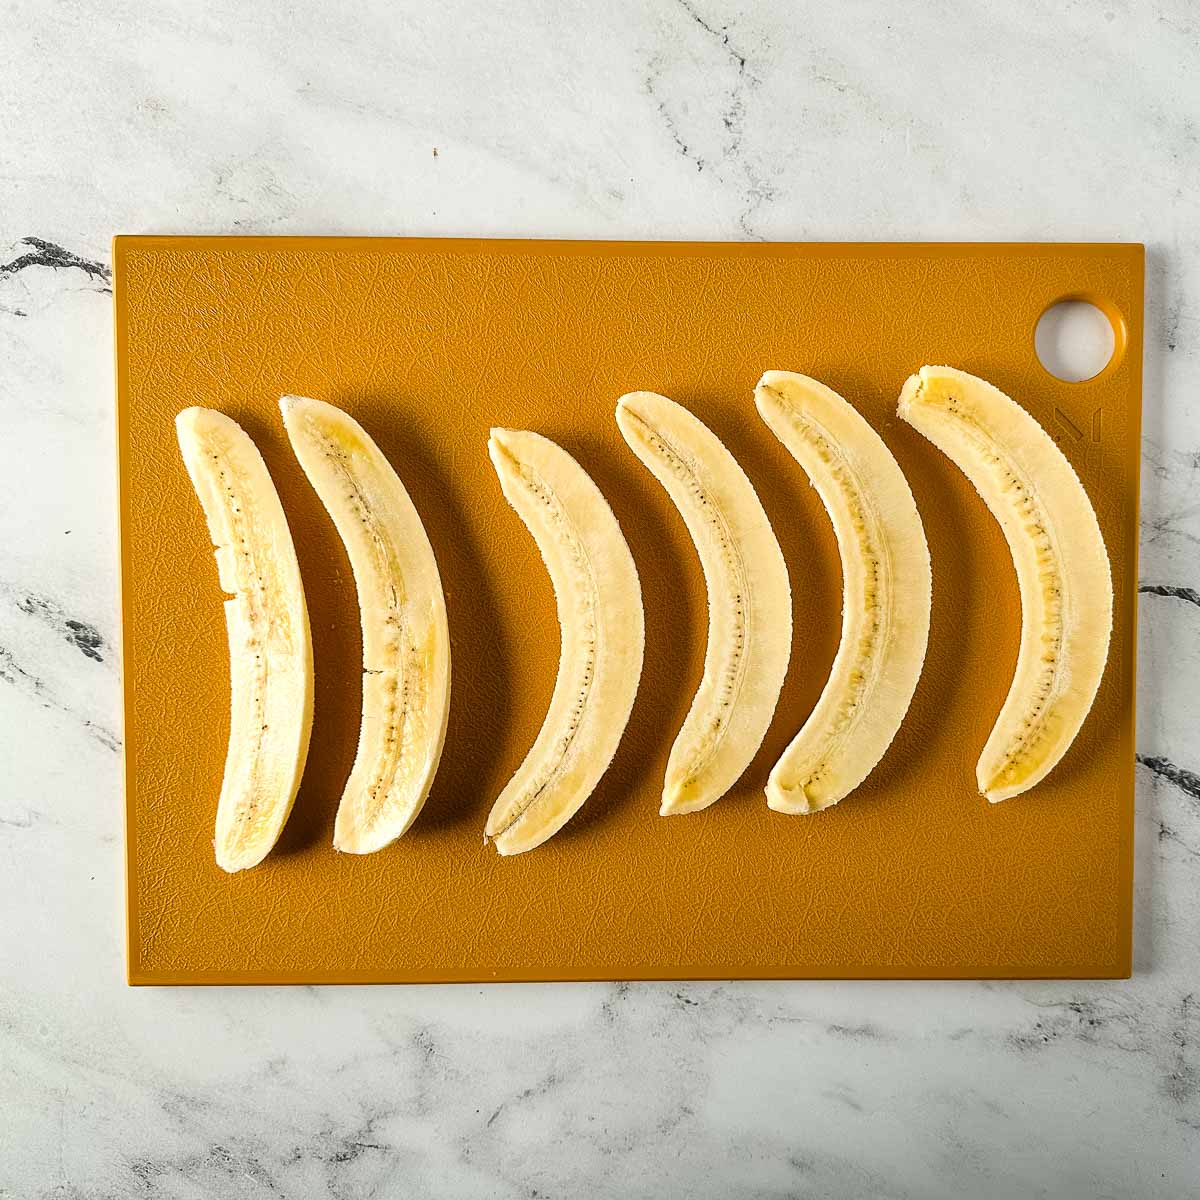 Halved bananas sit on a yellow cutting board.